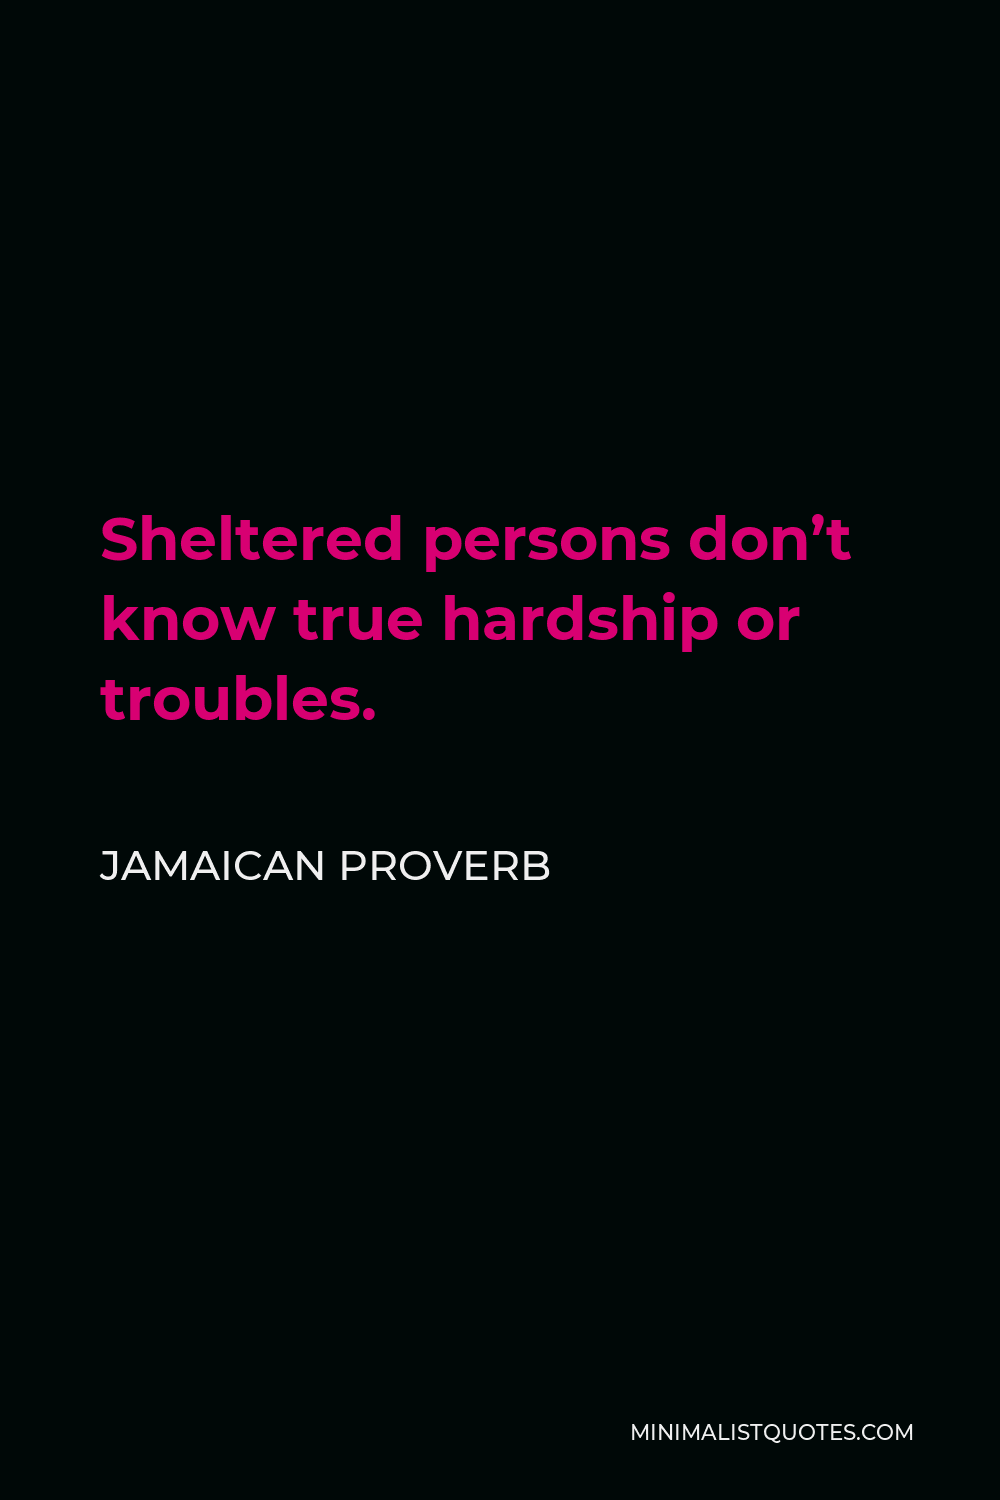 Jamaican Proverb Quote - Sheltered persons don’t know true hardship or troubles.